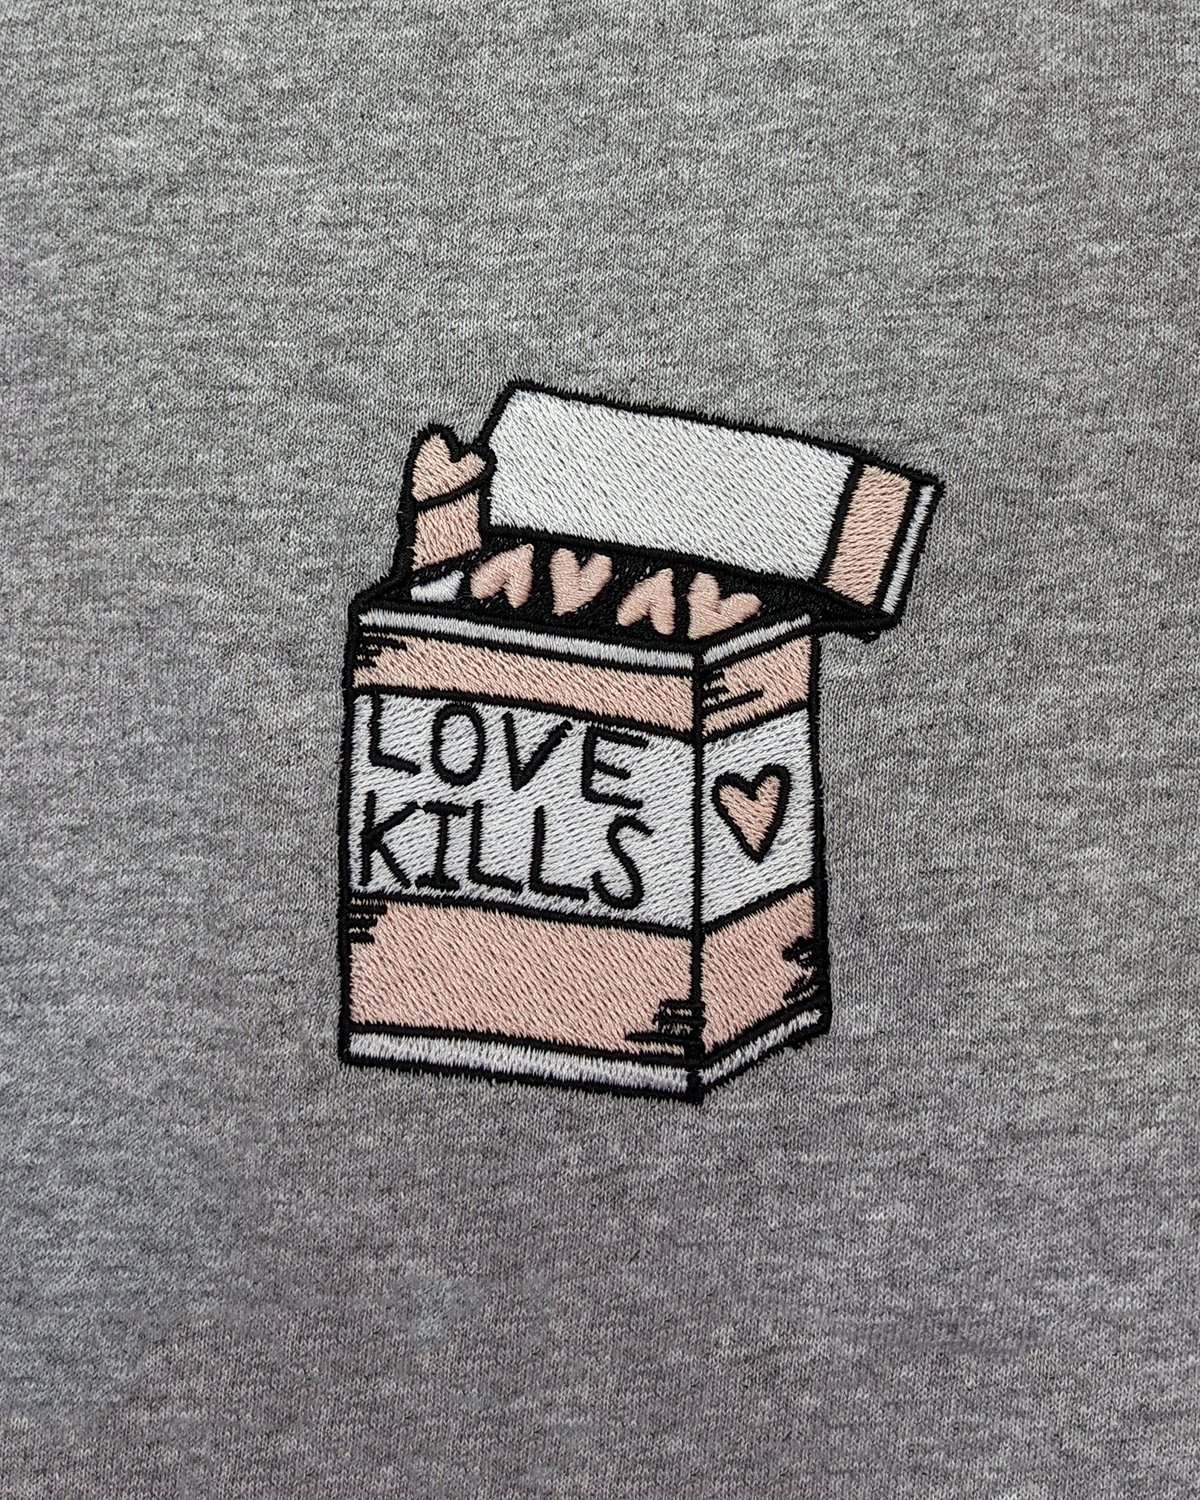 Image of CATCALL 'Love Kills' Embroidered T-Shirt in GREY